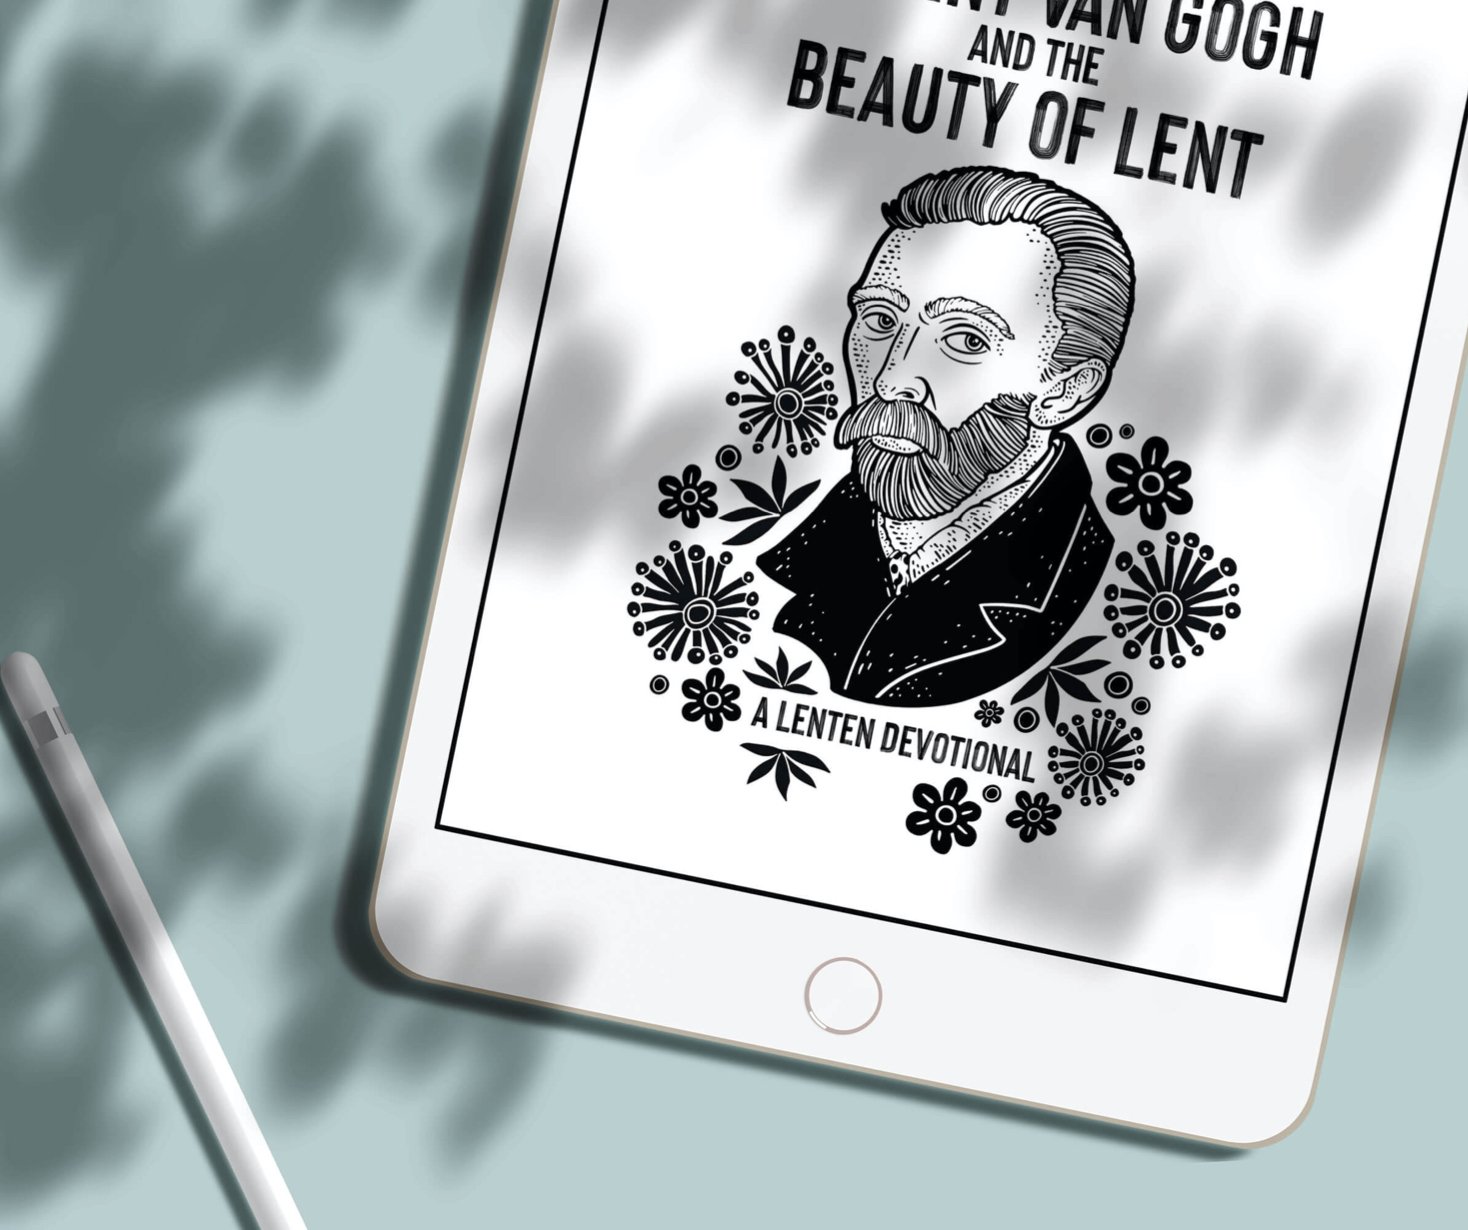 Vincent van Gogh and the Beauty of Lent